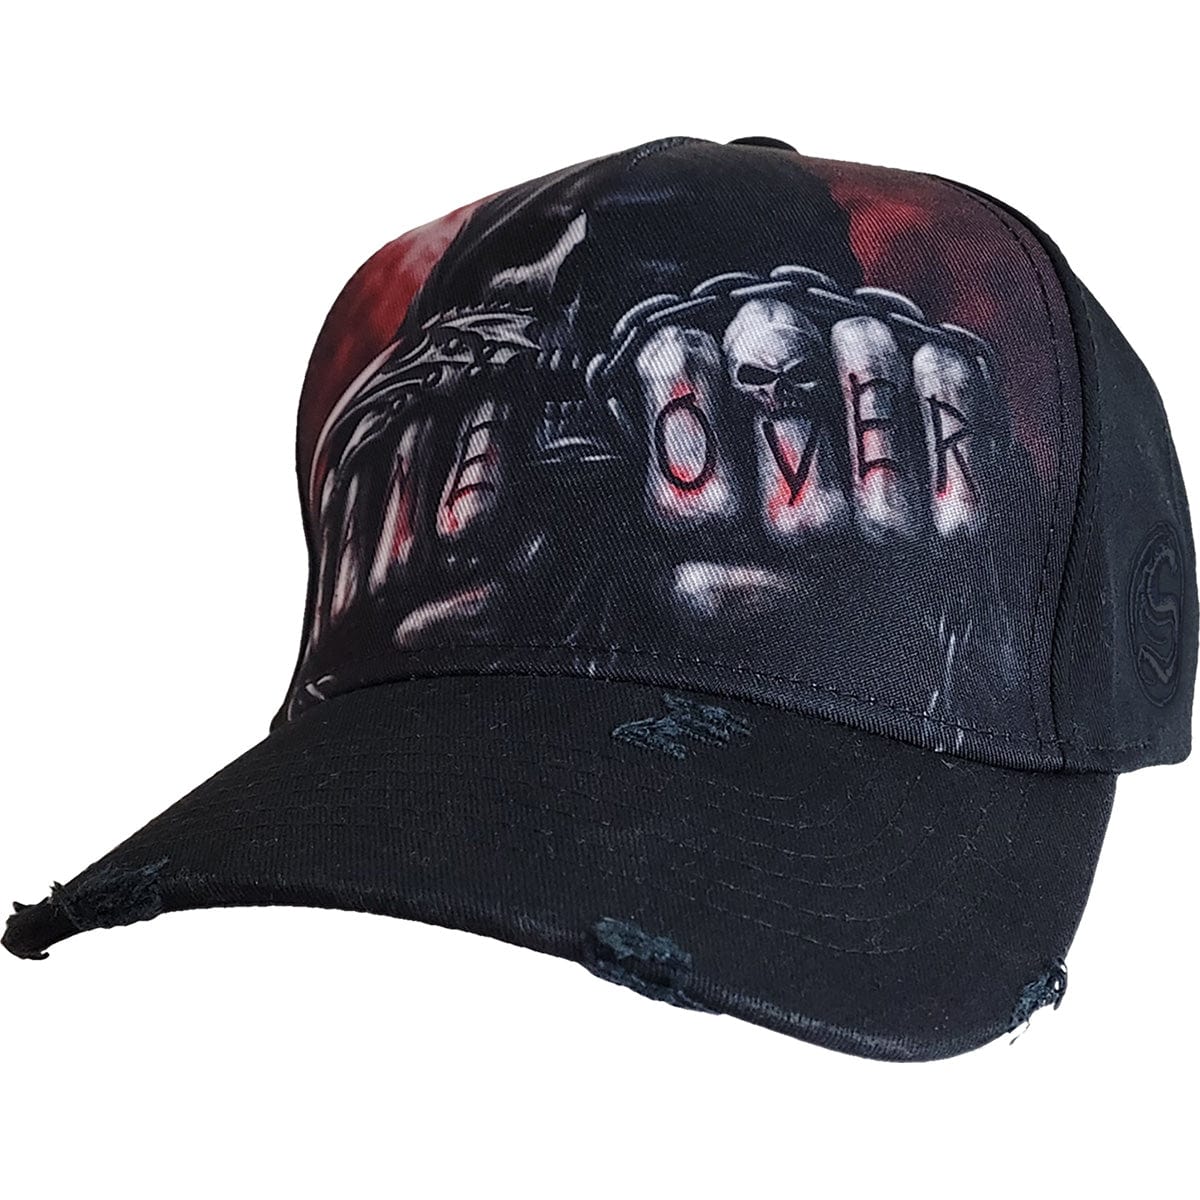 GAME OVER - Baseball Caps Distressed with Metal Clasp